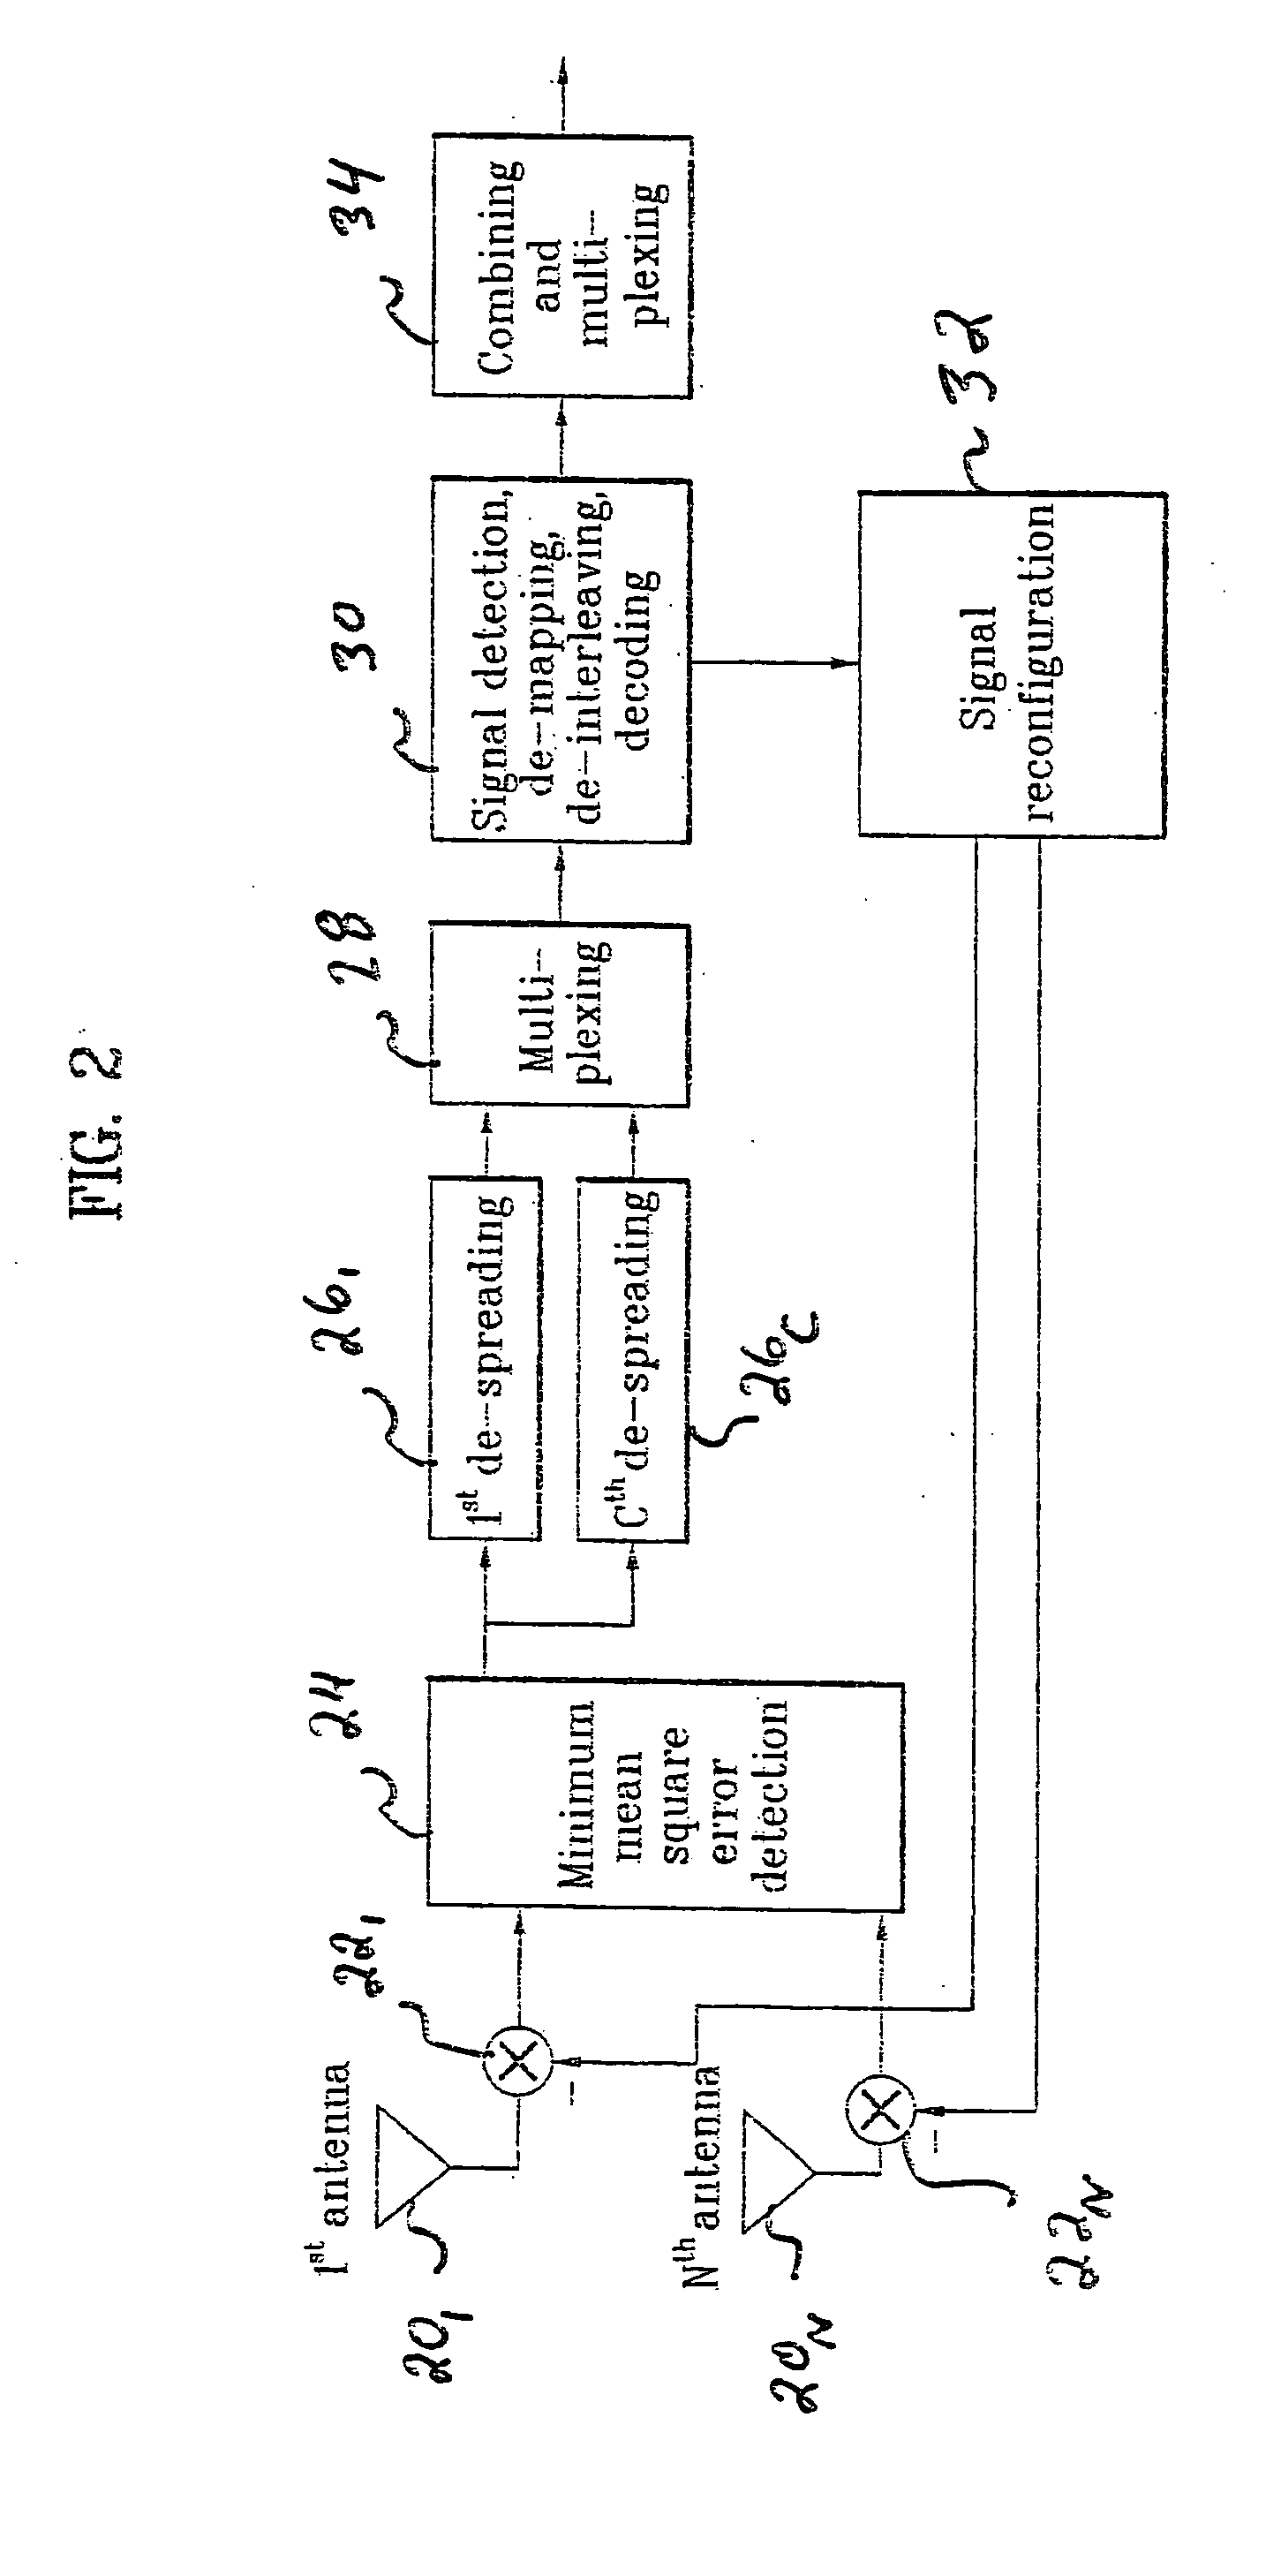 Method of controlling data modulation and coding applied to Multi-Input/Multi-Output system in mobile communications